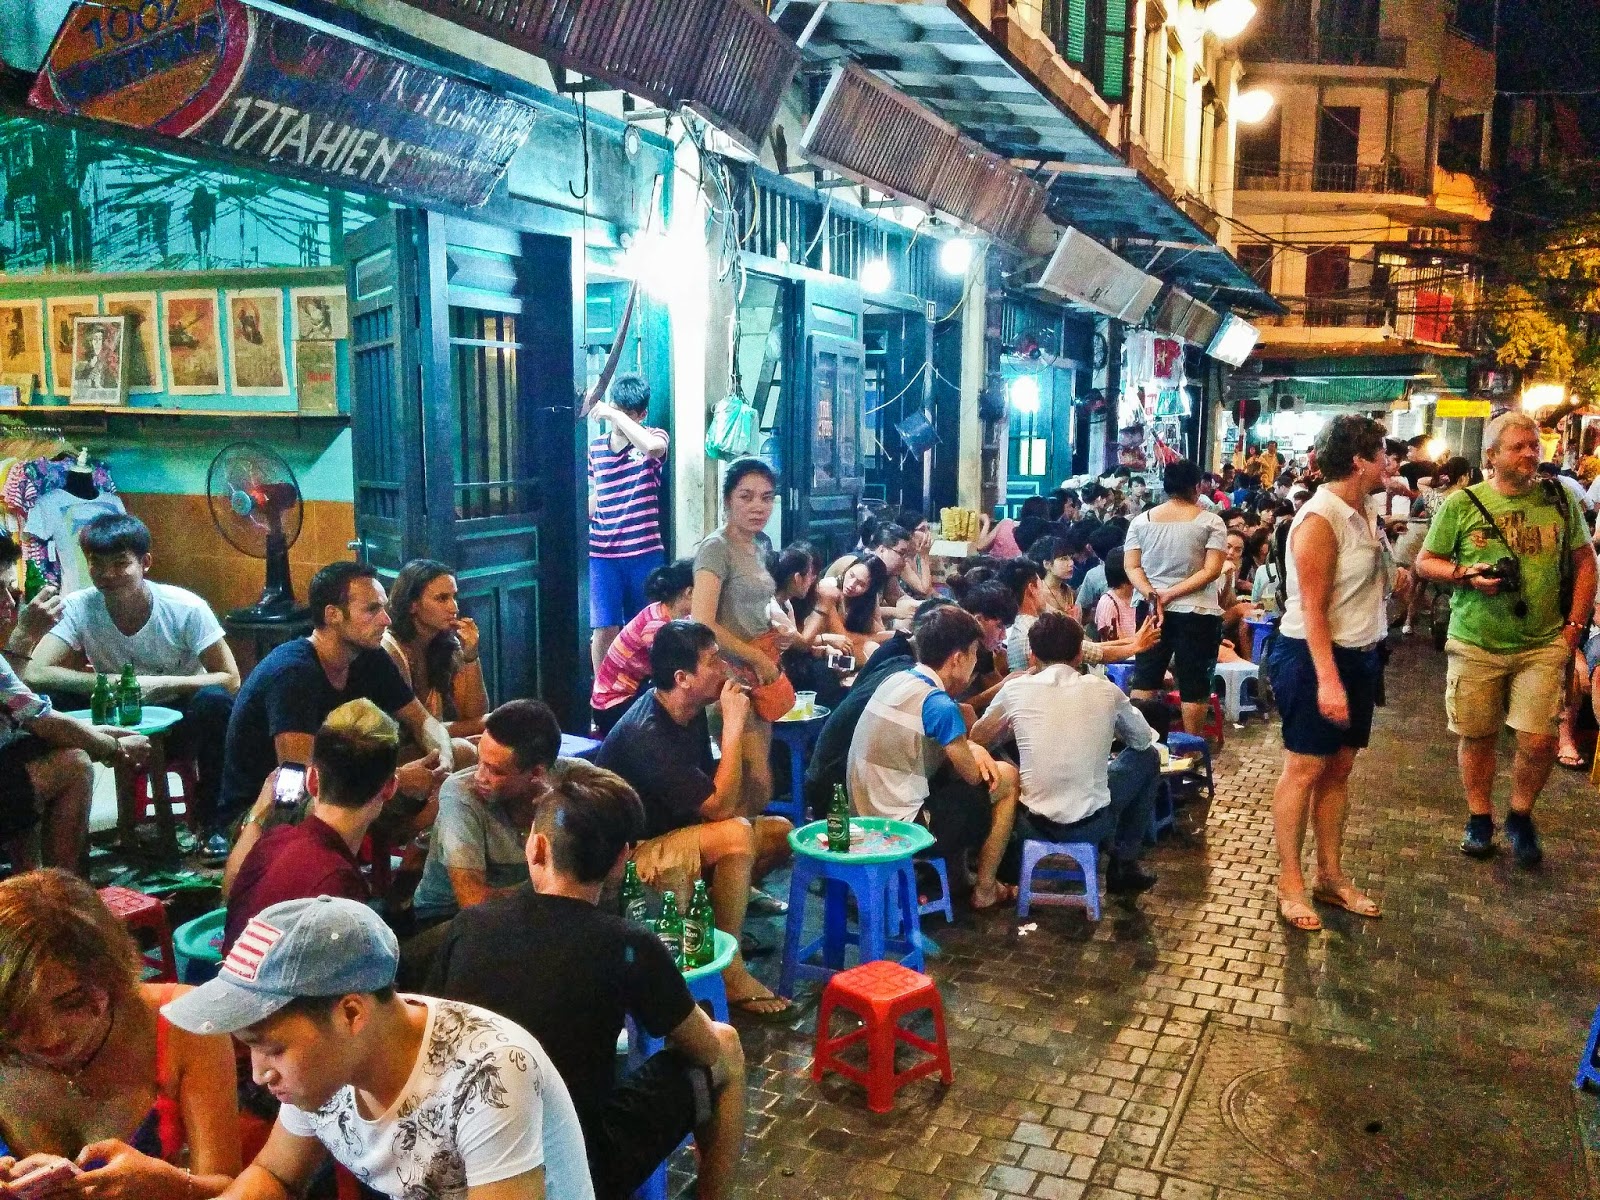 Night activities on the “Street for Foreigners”